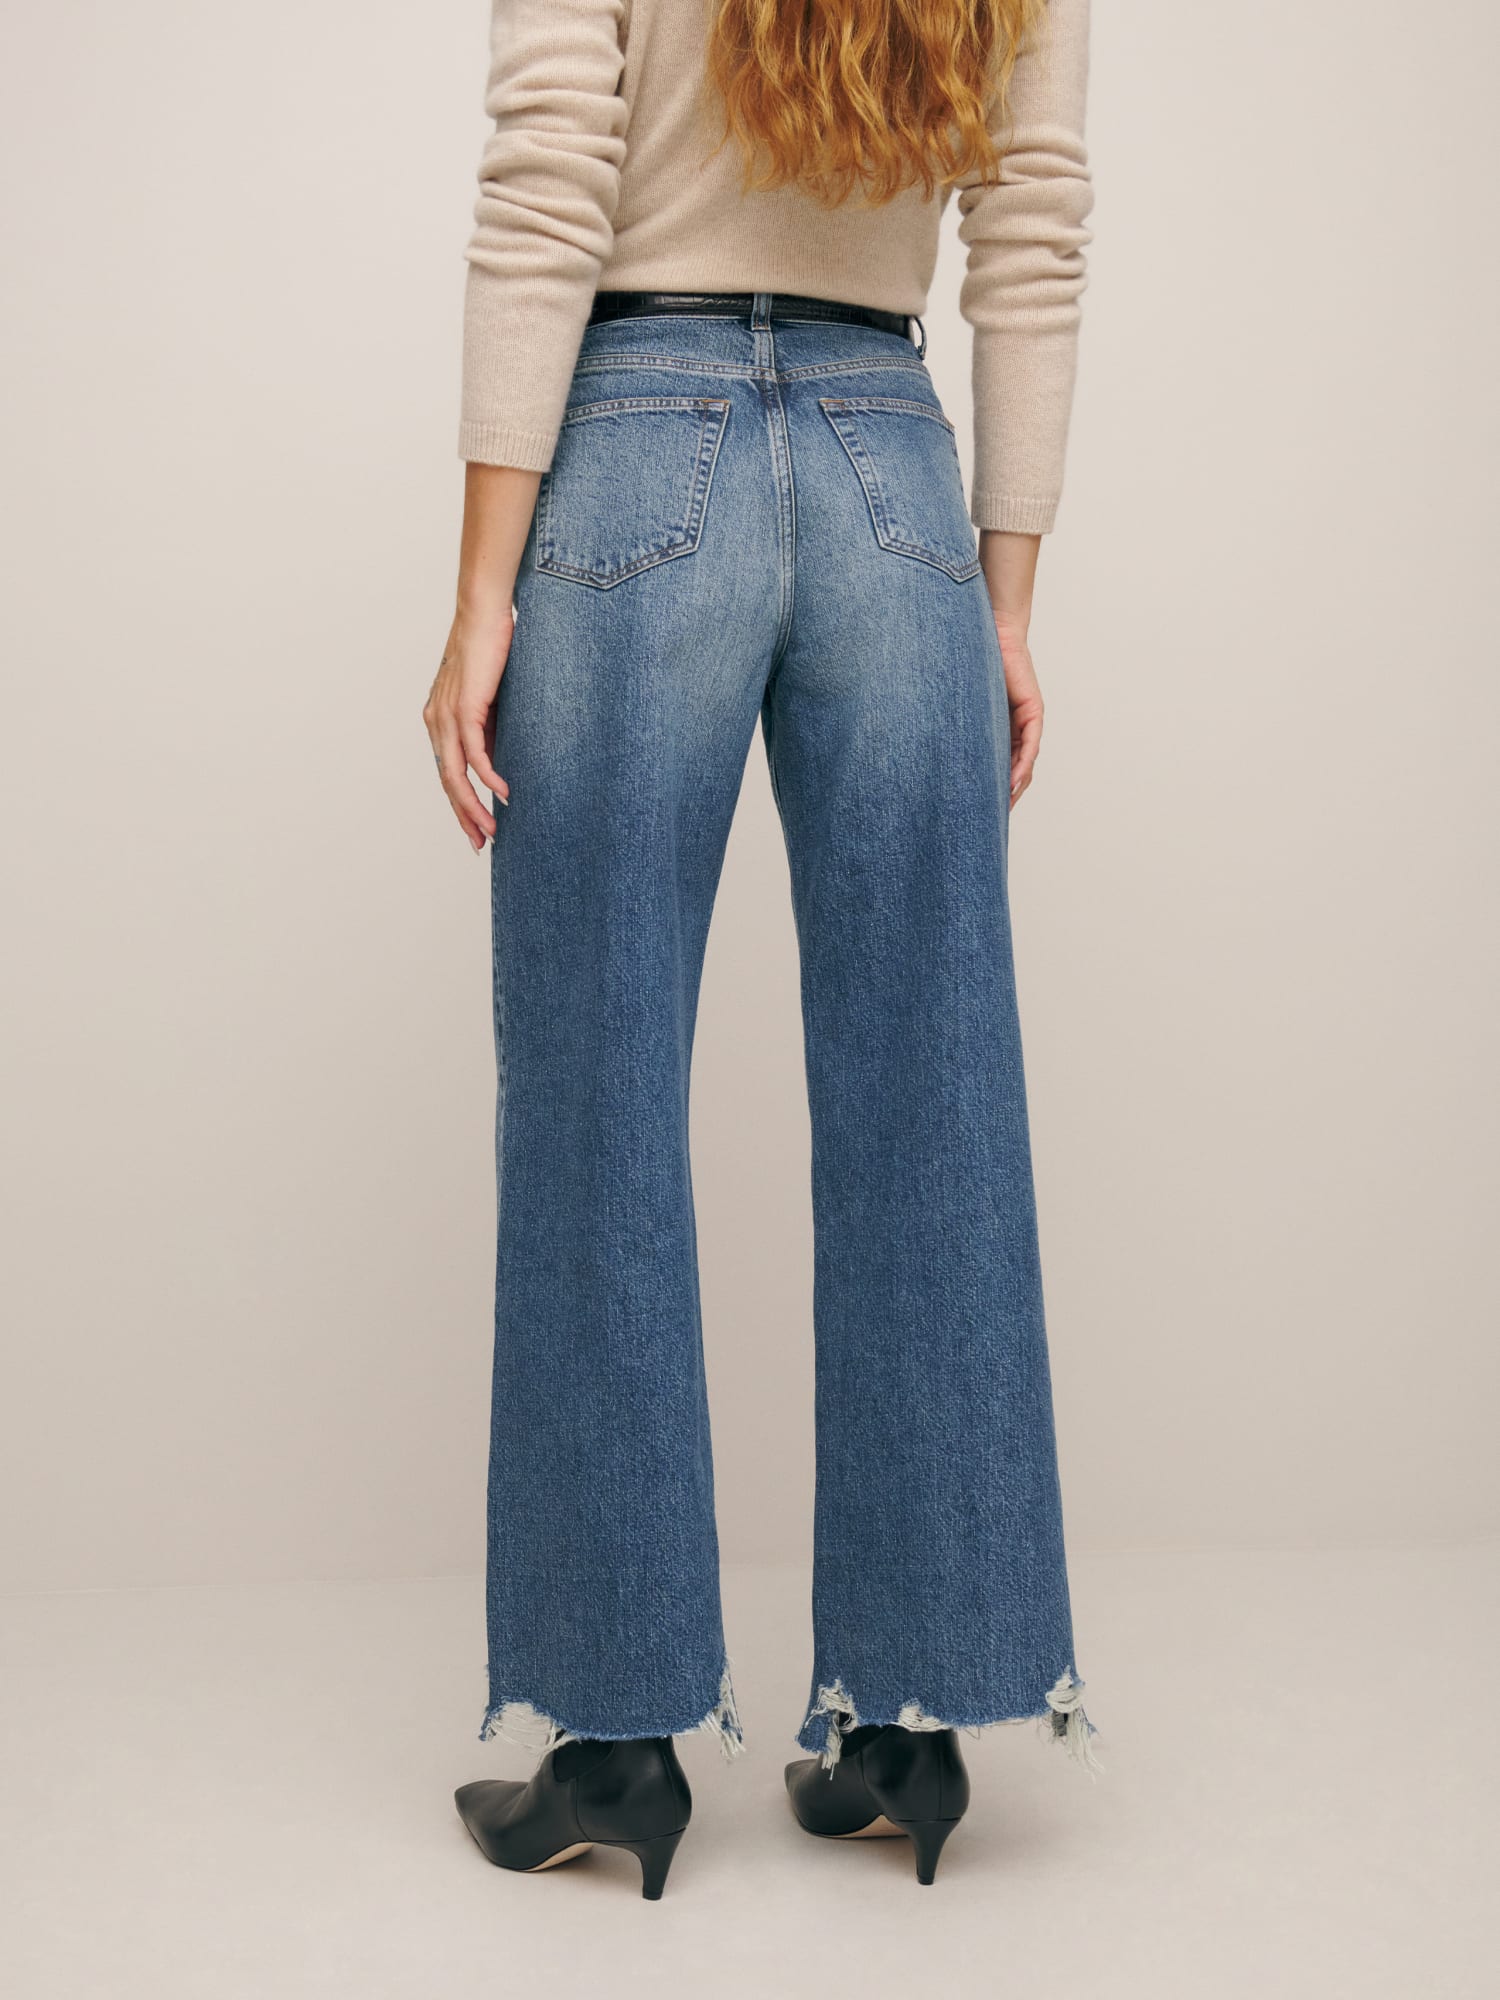 Reformation Cary Low Rise Slouchy Wide Leg Jeans